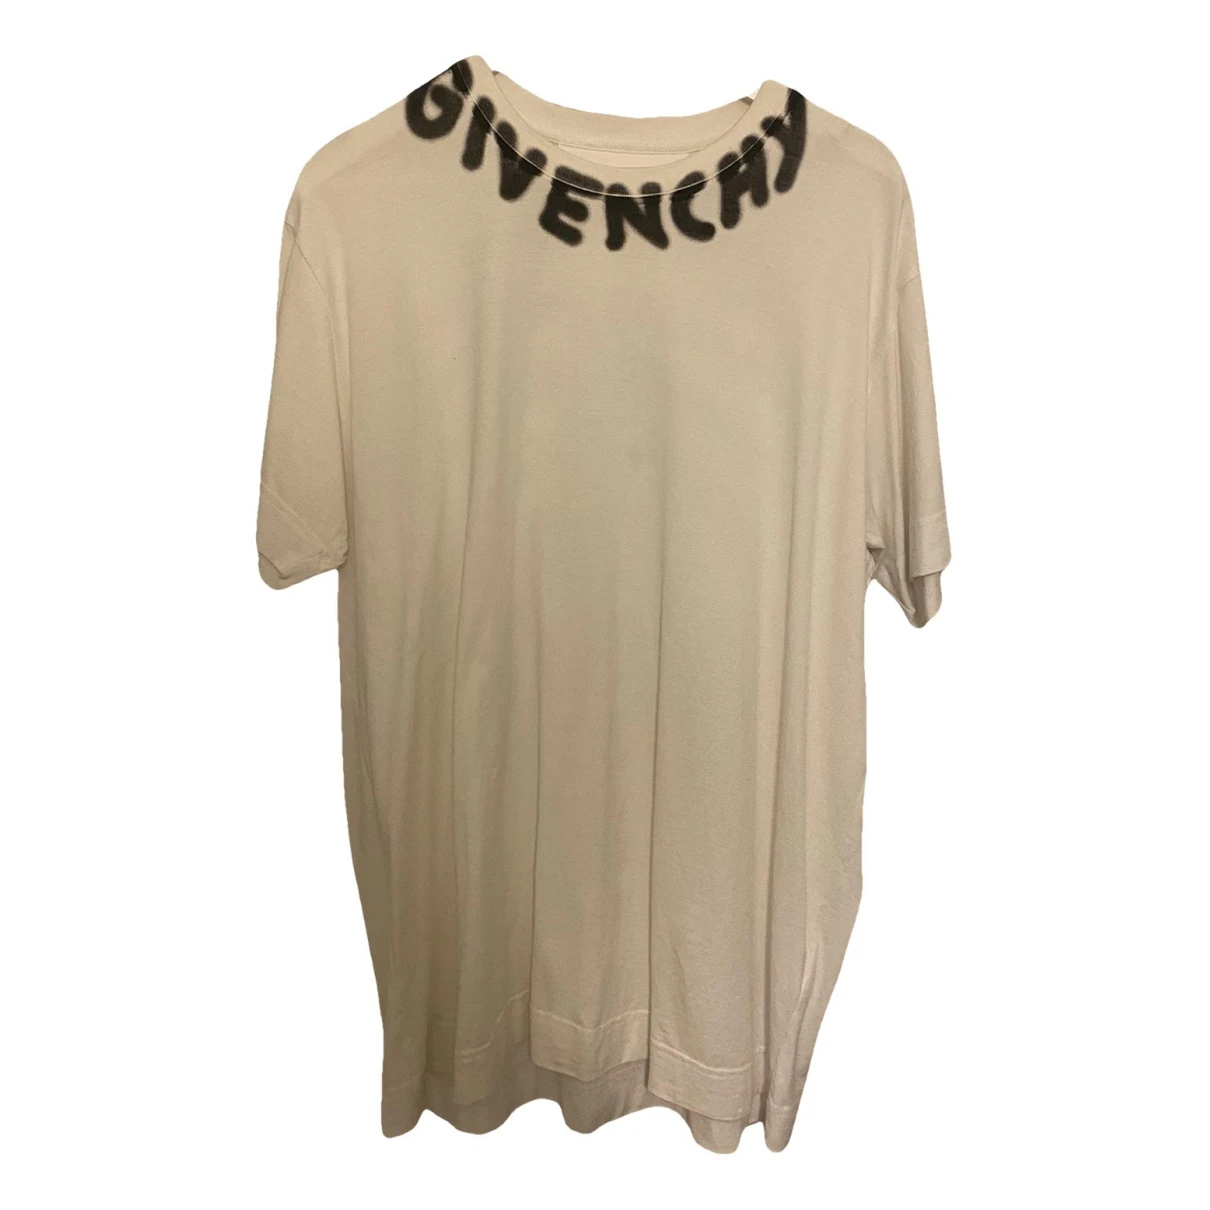 Pre-owned Givenchy T-shirt In White